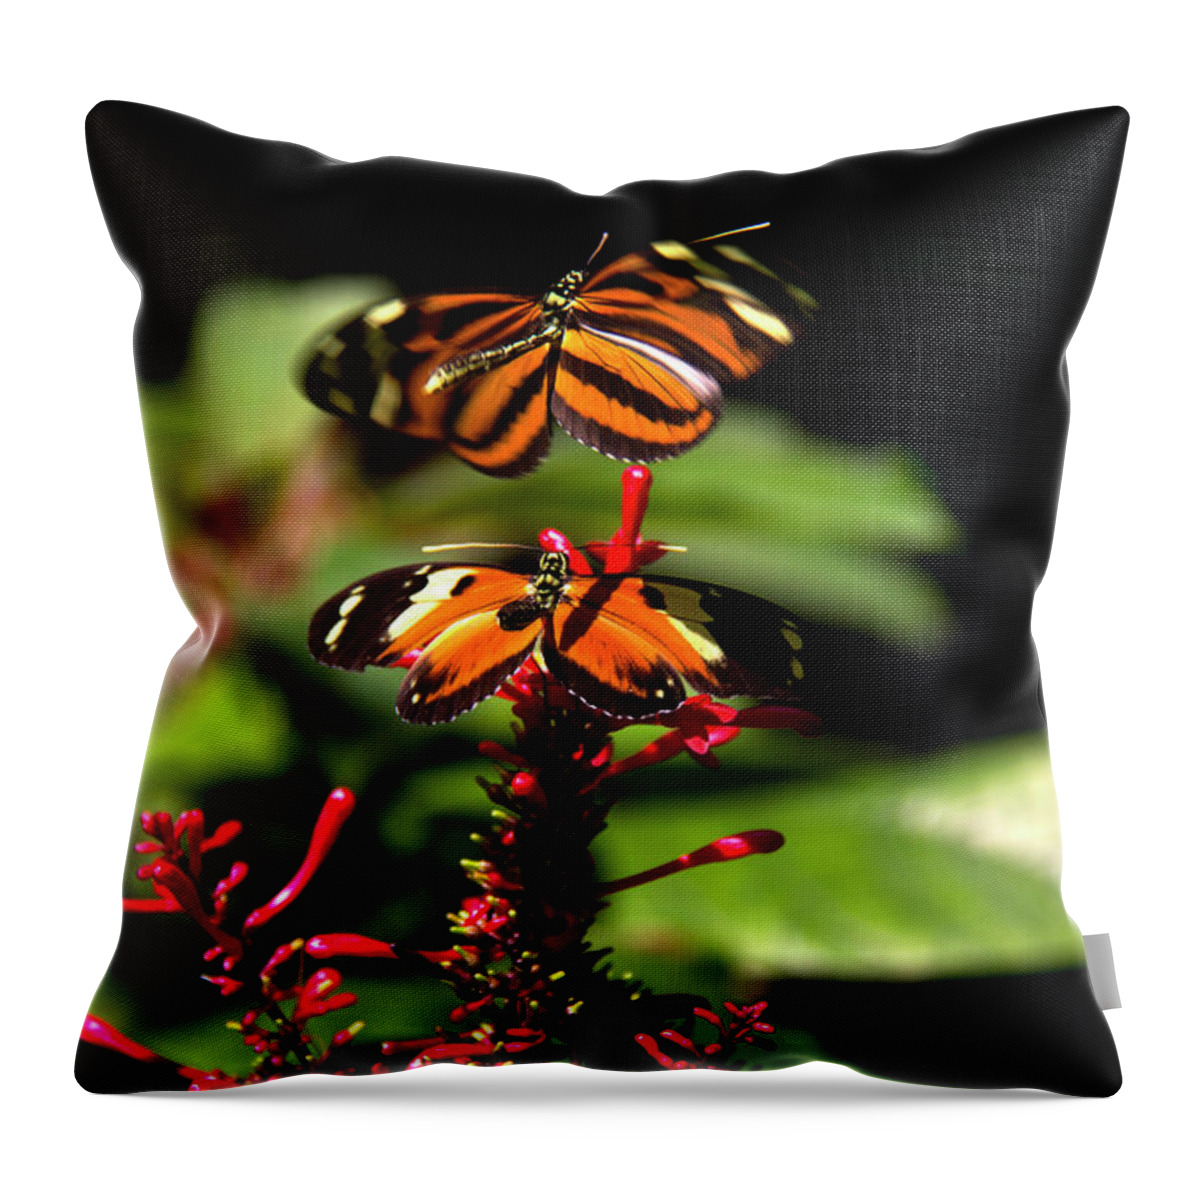 Butterfly Throw Pillow featuring the photograph Butterfly by Richard Krebs